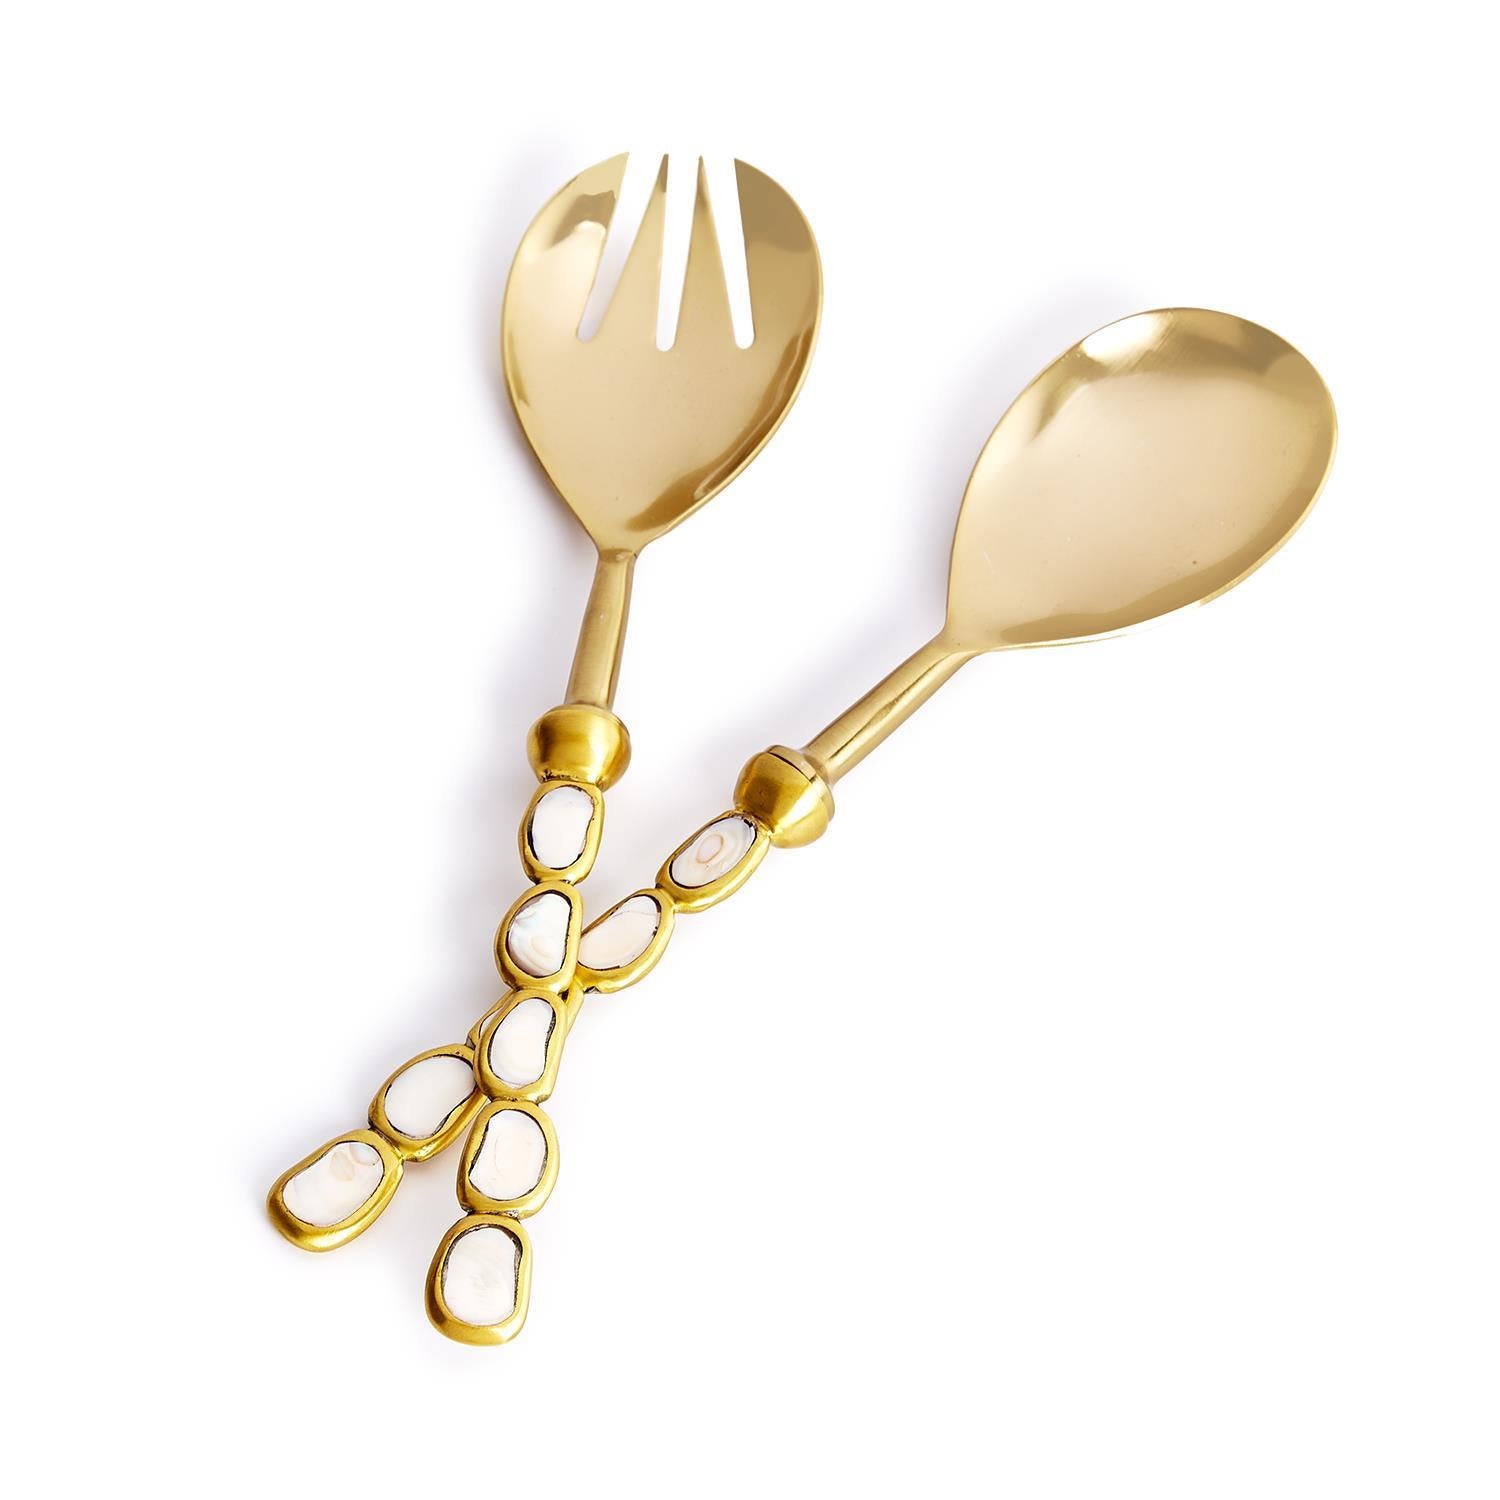 Mother of Pearl Serving Set